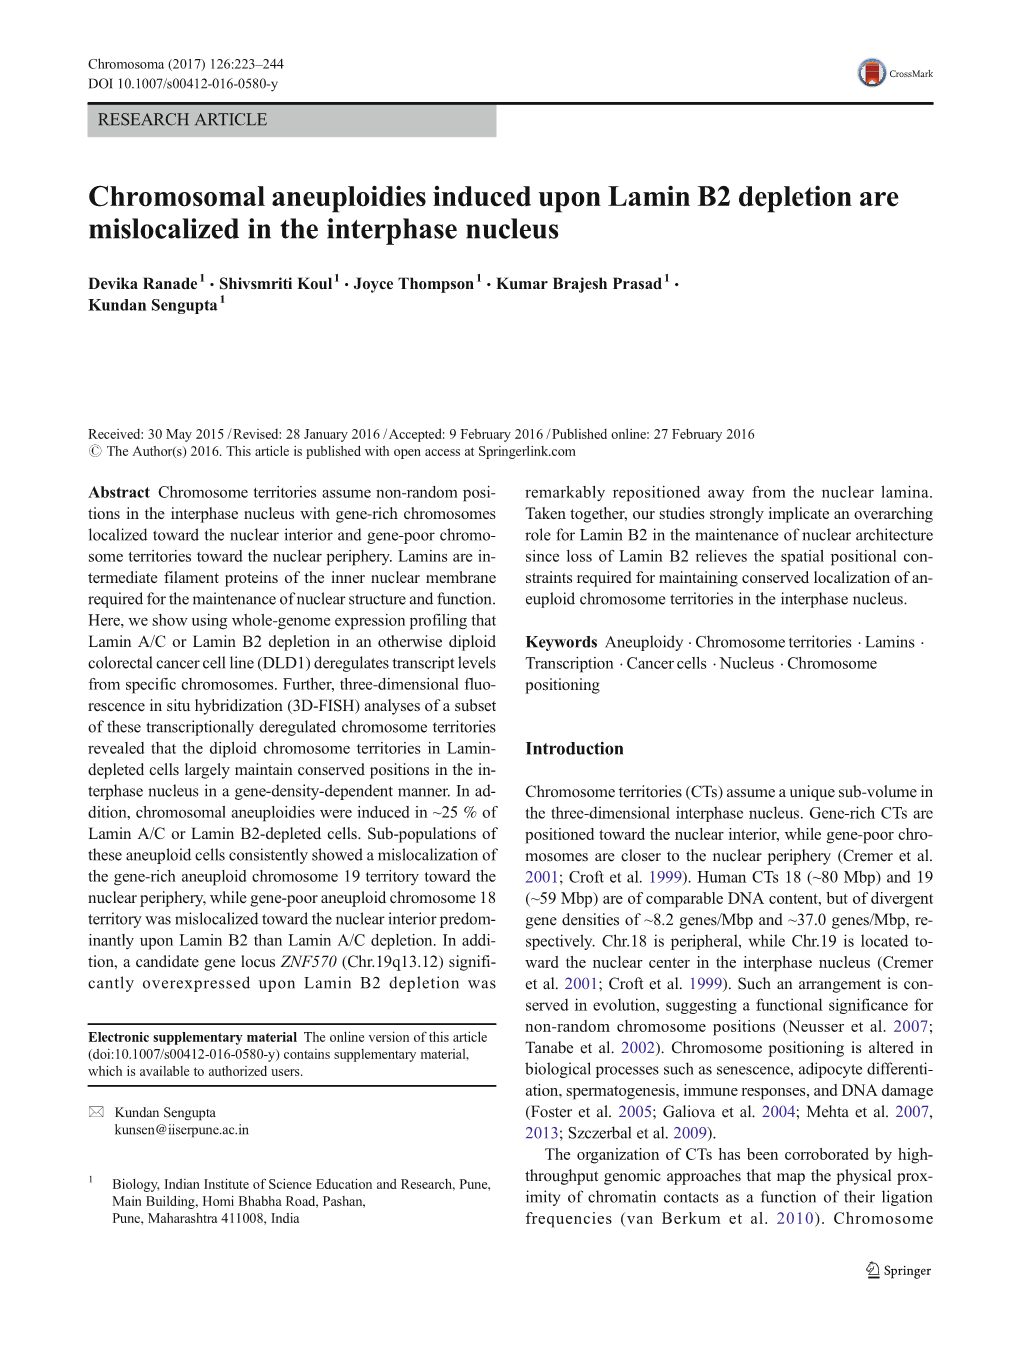 Chromosomal Aneuploidies Induced Upon Lamin B2 Depletion Are Mislocalized in the Interphase Nucleus